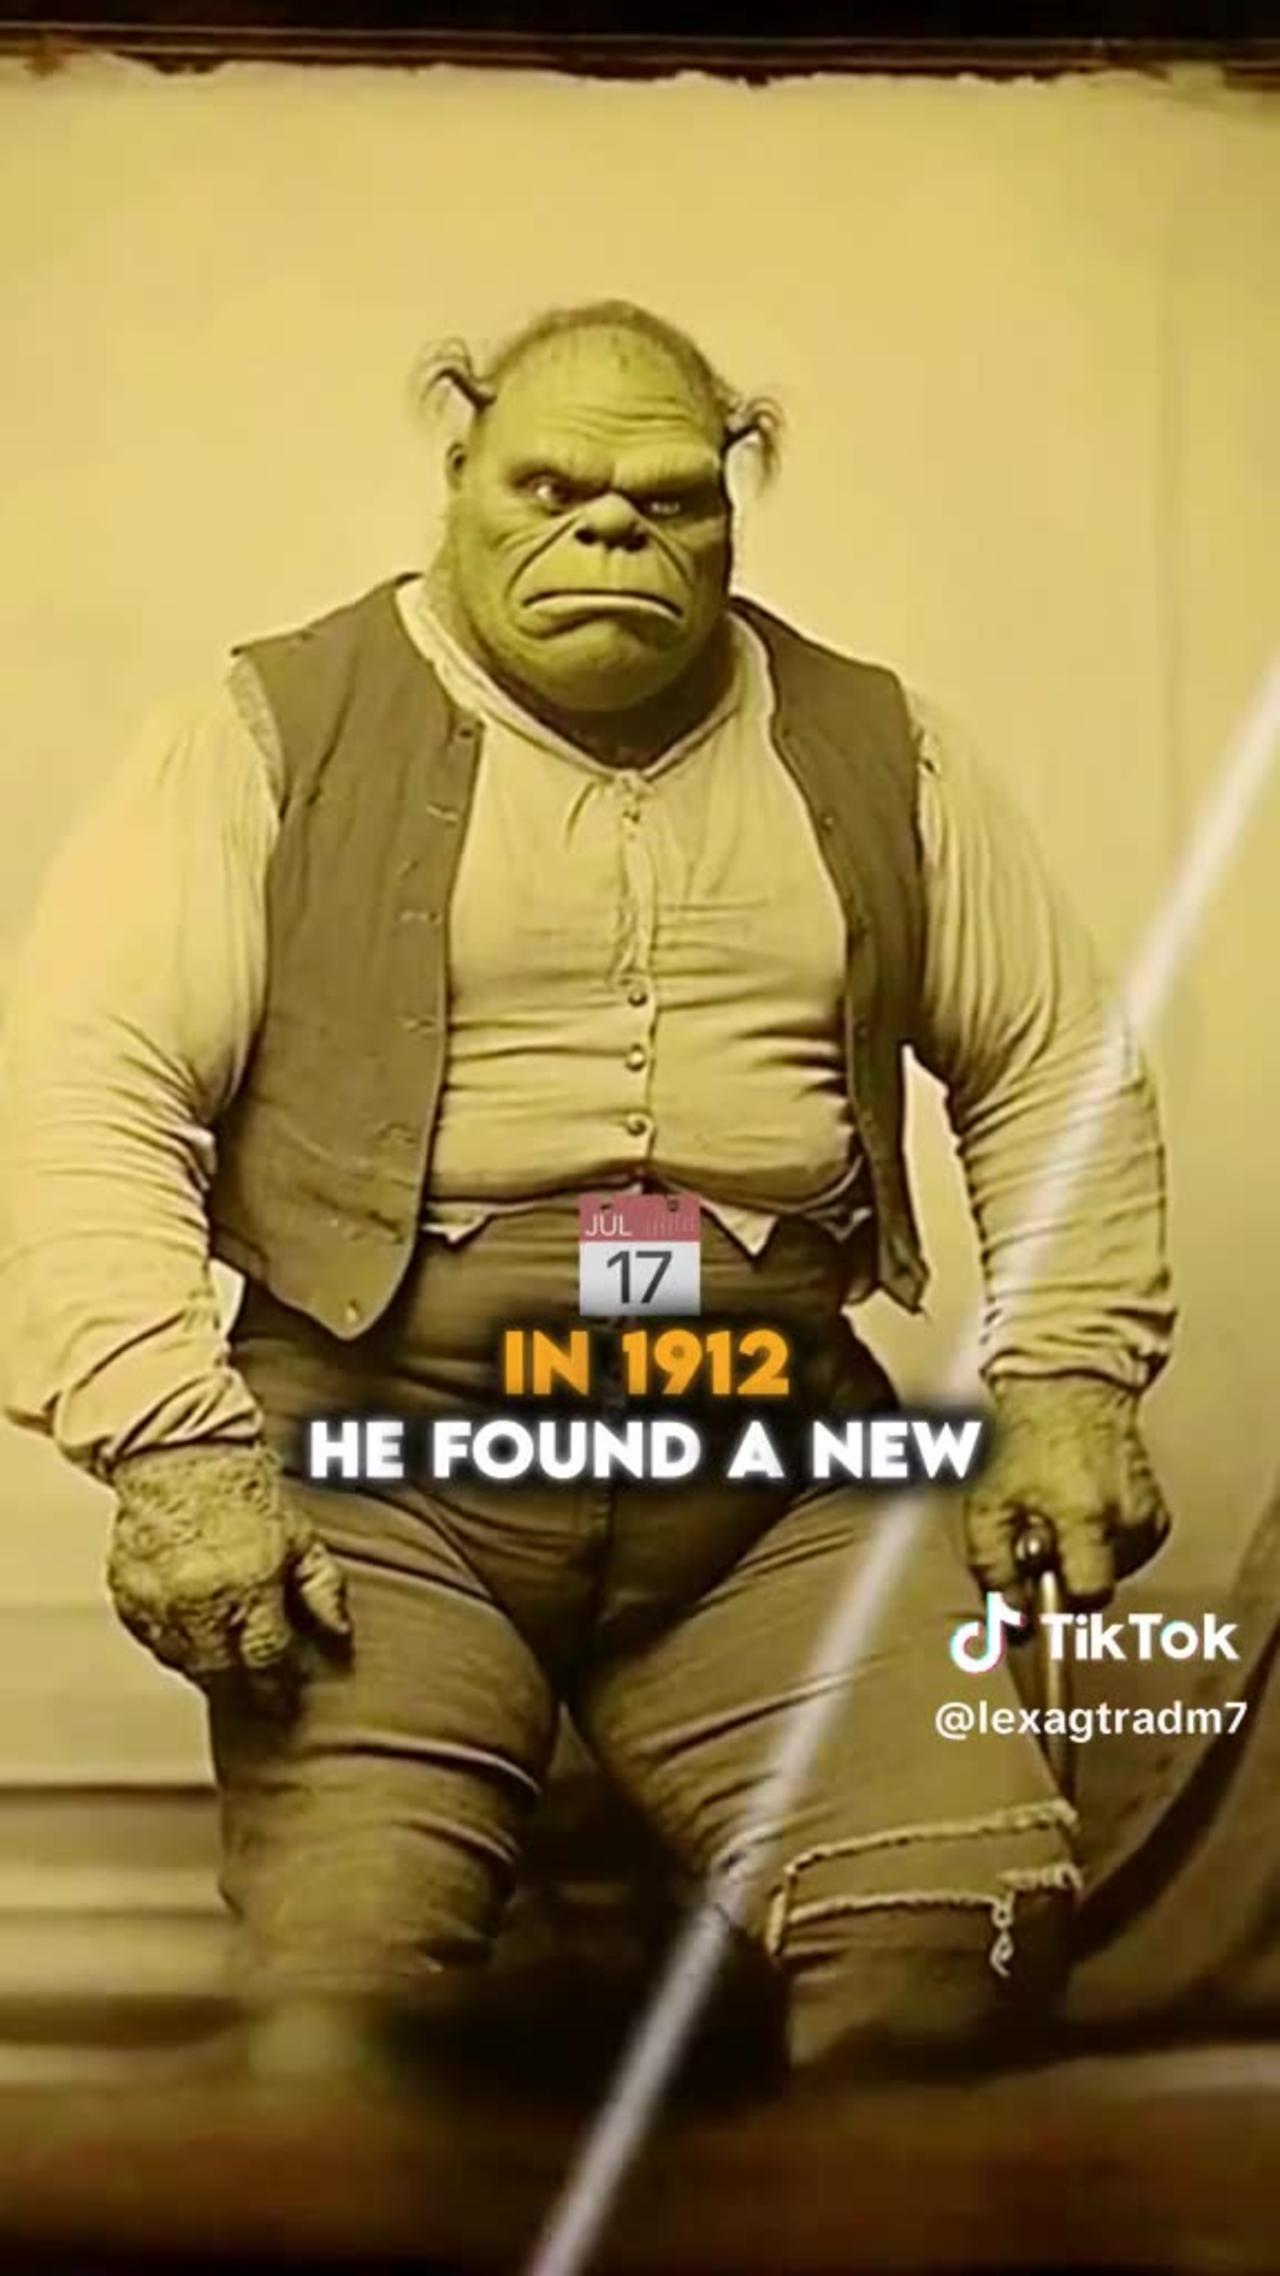 THIS MAN WAS THE REAL SHREK